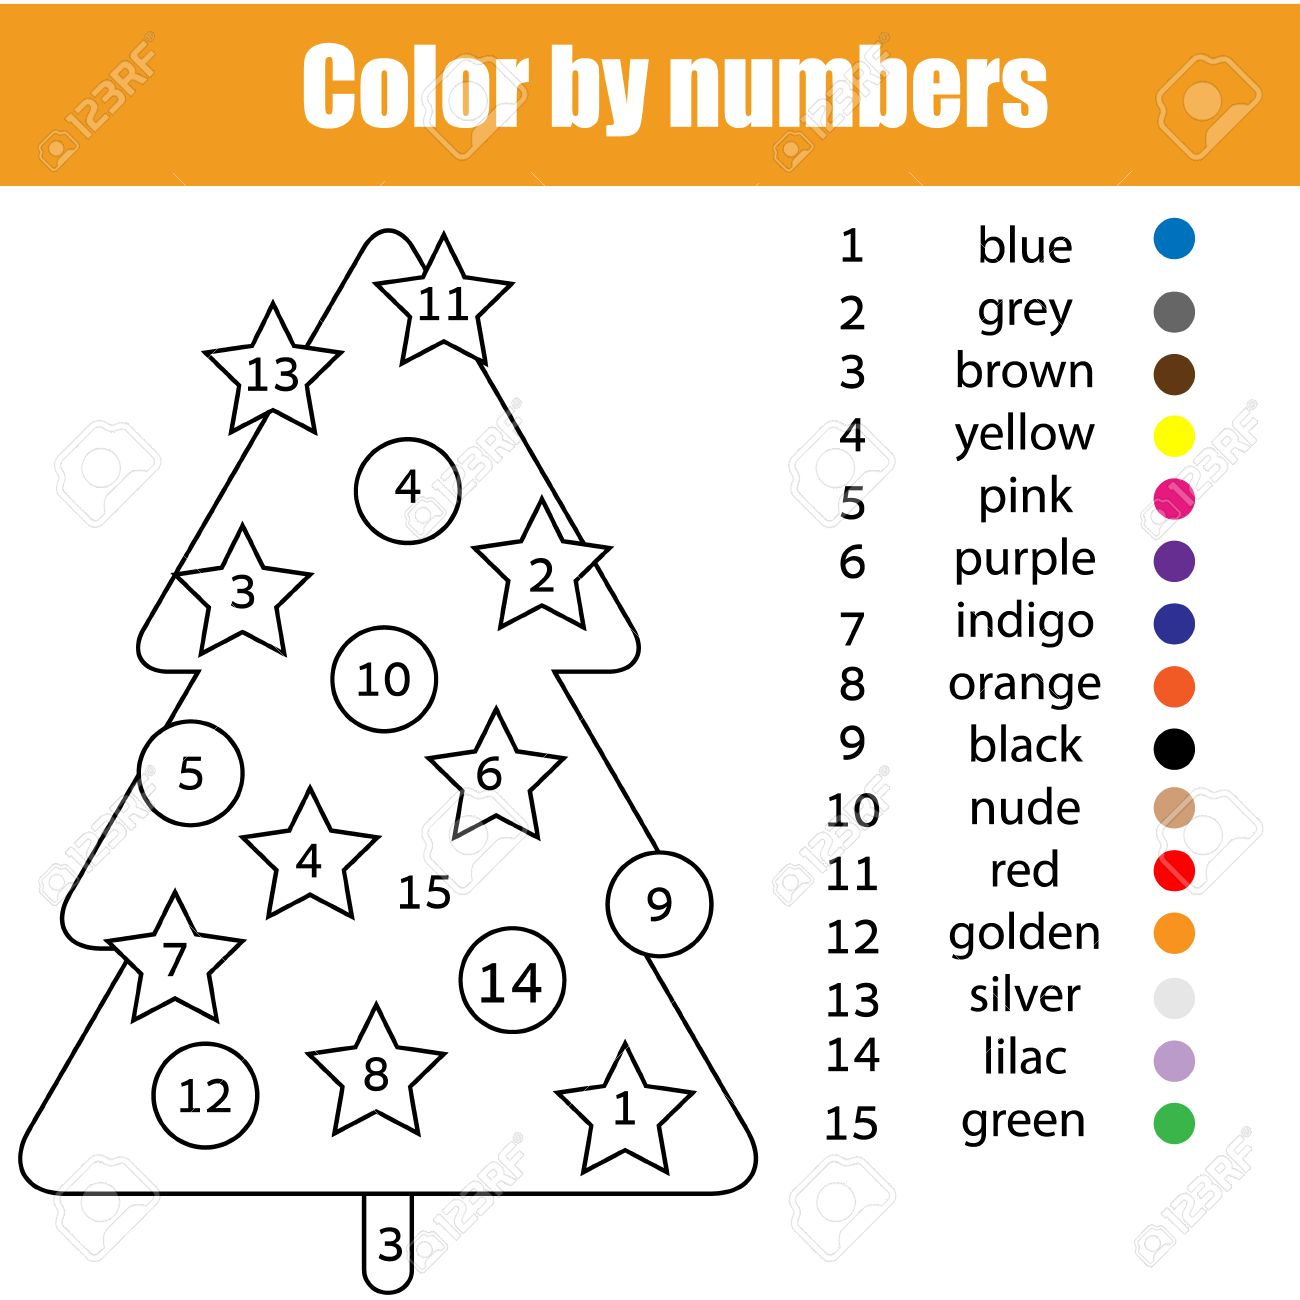 Coloring Page With Christmas Tree. Colornumbers Task, Printable..